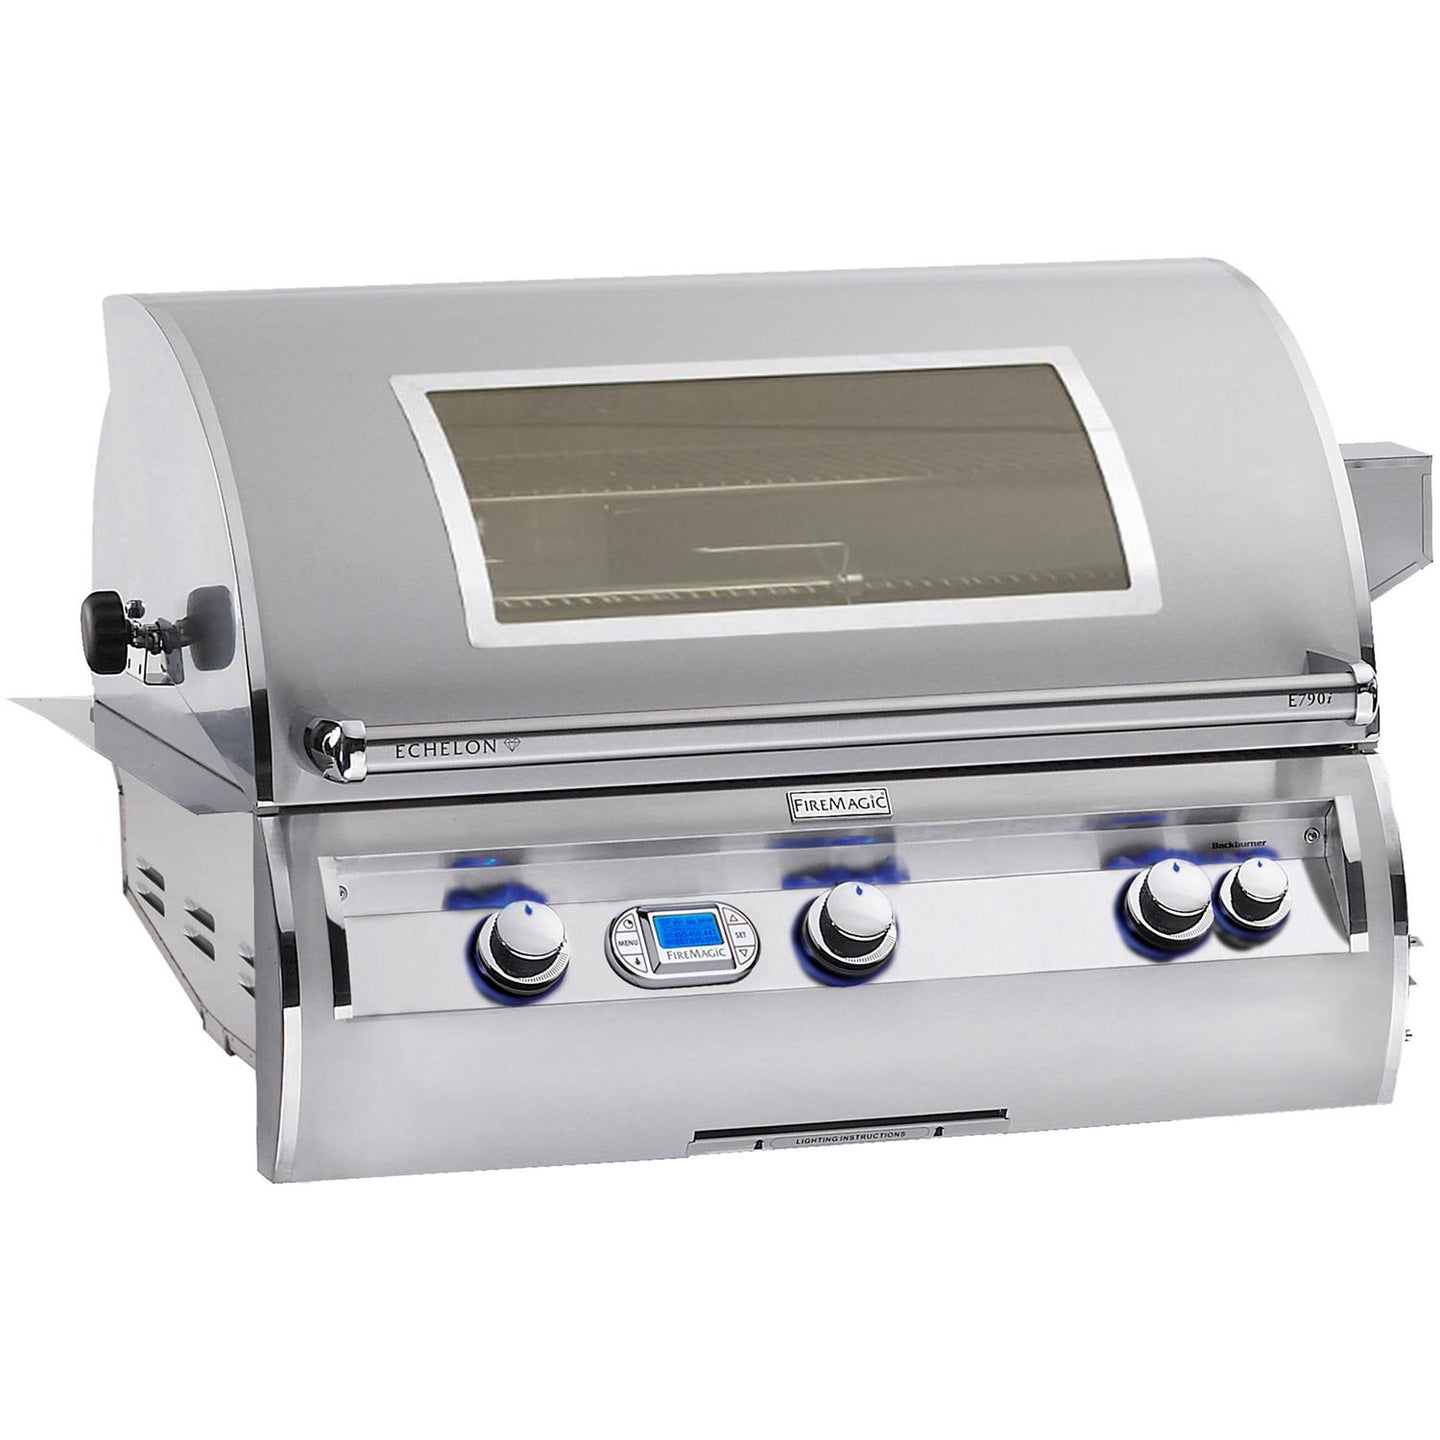 Fire Magic Echelon Diamond E790i 36-Inch Built-In Gas Grill With One Infrared Burner and Digital Thermometer- E790i-4L1P/N / With Magic Viewing Window - E790i-4L1P/N-W - The Garden District